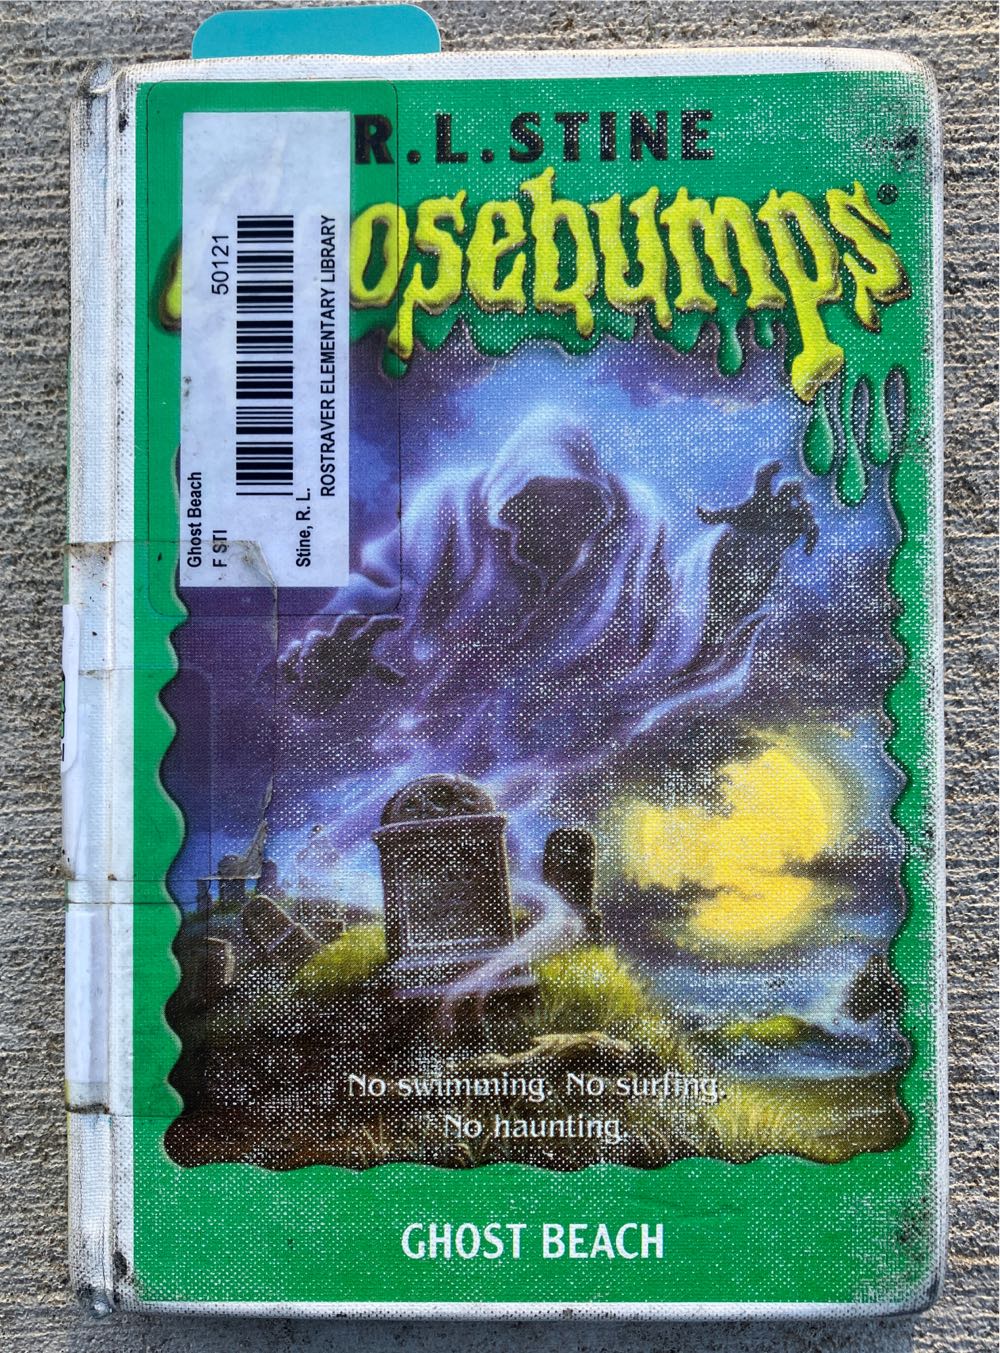 Goosebumps 22: Ghost Beach - R.L. Stine (Scholastic  Inc. - Paperback) book collectible [Barcode 9780439568302] - Main Image 2